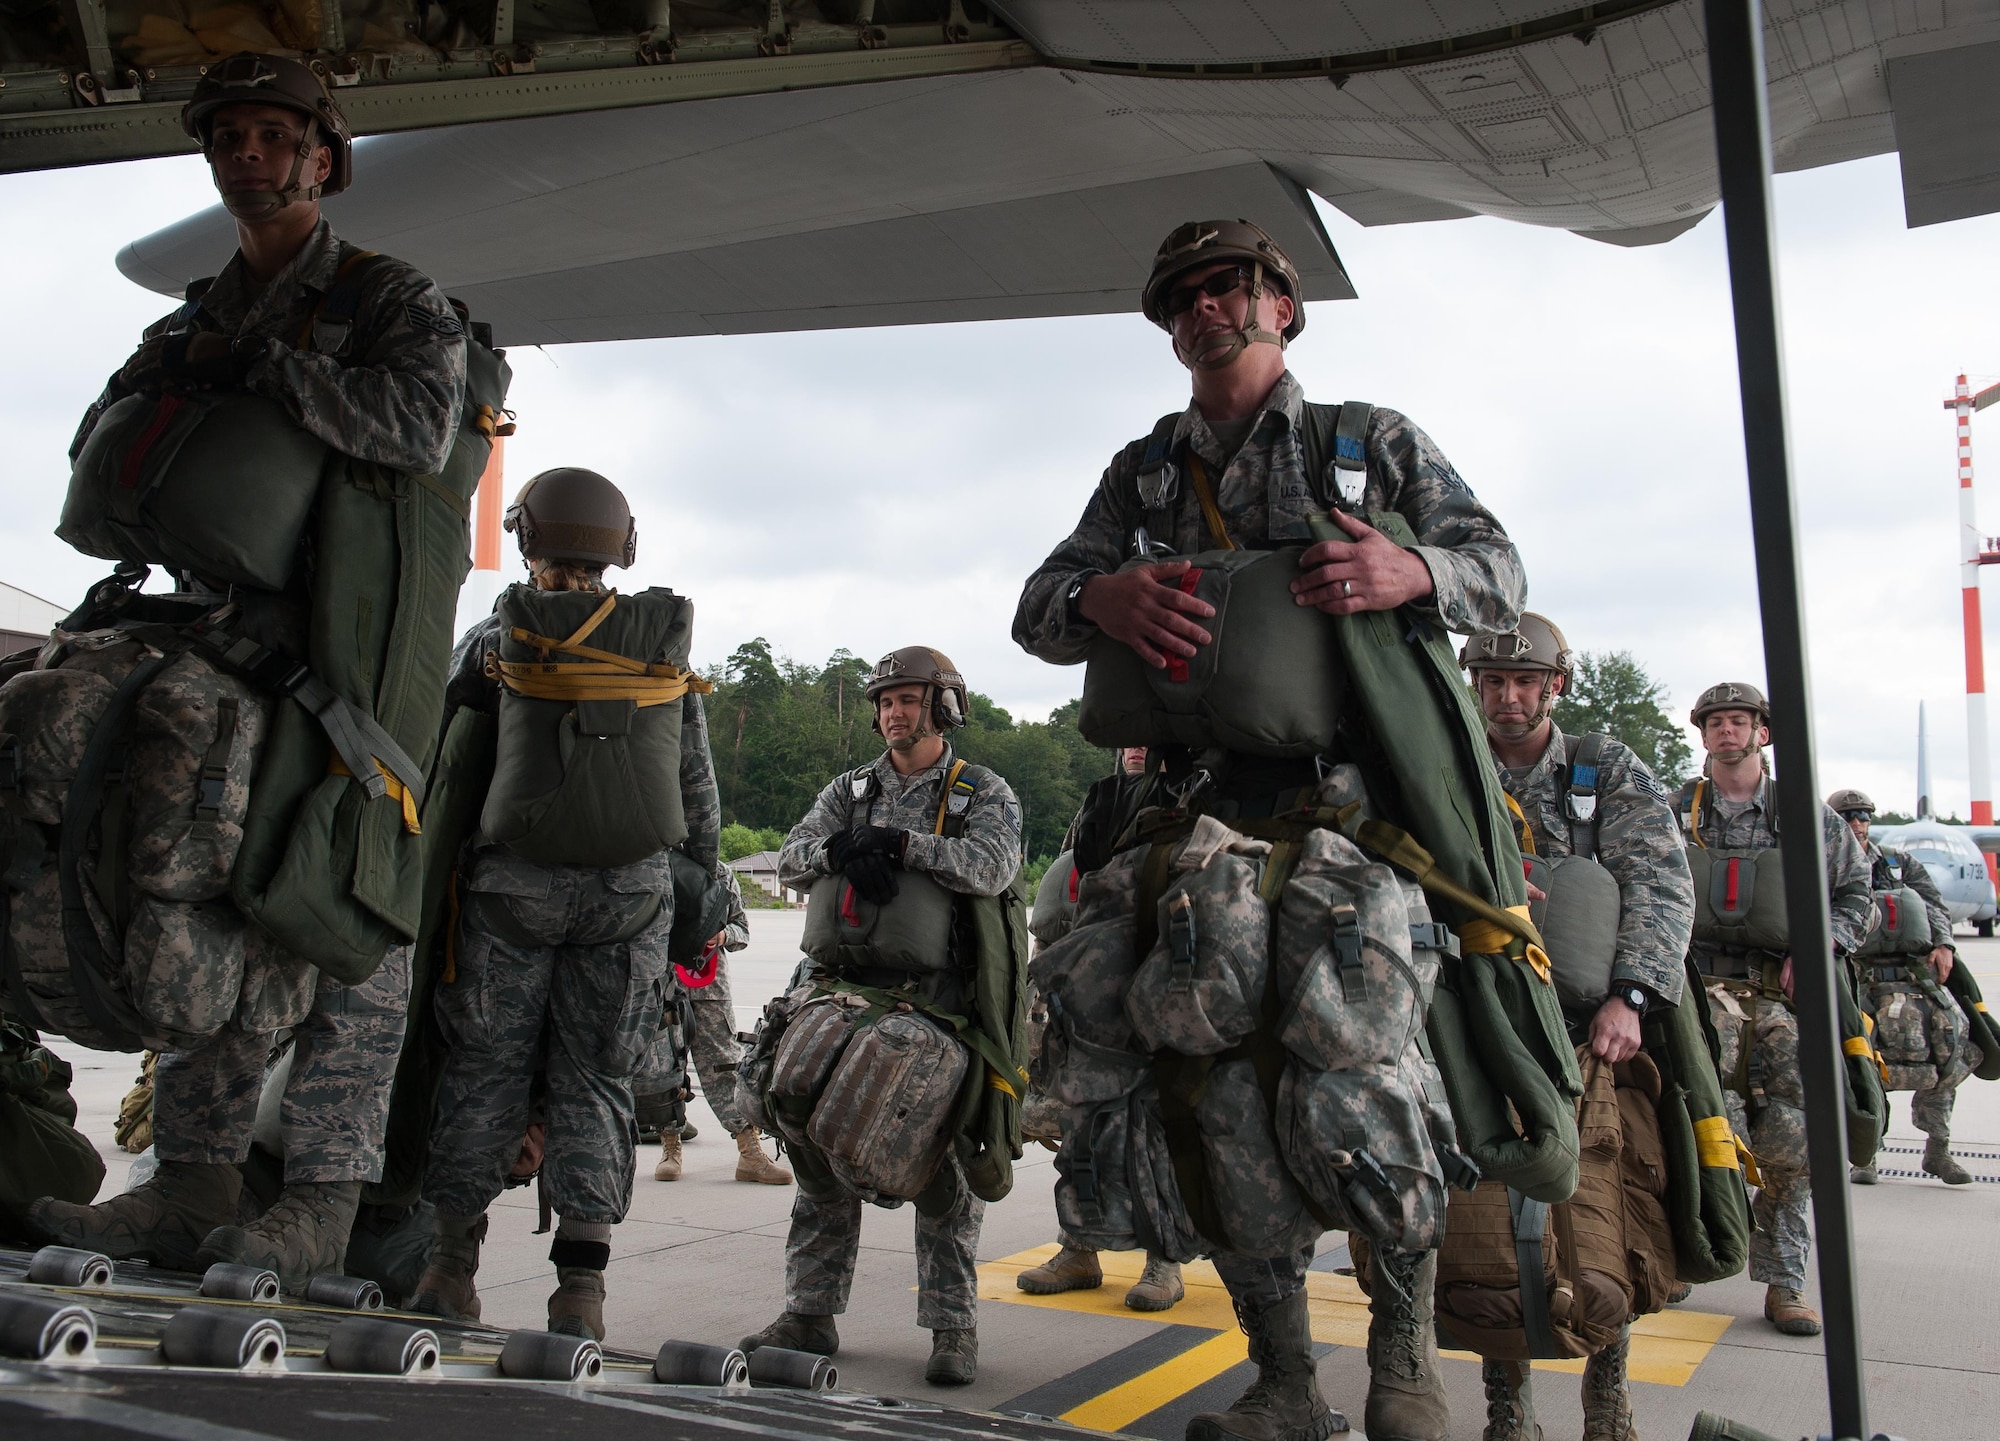 Airmen from the 2nd Air Support Operations Squadron board a C-130J Super Hercules to participate in a Joint Airborne Air Transportability Training exercise with the 37th Airlift Squadron June 30, 2016, at Ramstein Air Base, Germany. The exercise allowed the Airmen to test their abilities in flying to a location and successfully jumping out and landing in a designated area, to prepare for future real-world scenarios. (U.S. Air force photo/Airman 1st Class Lane T. Plummer)